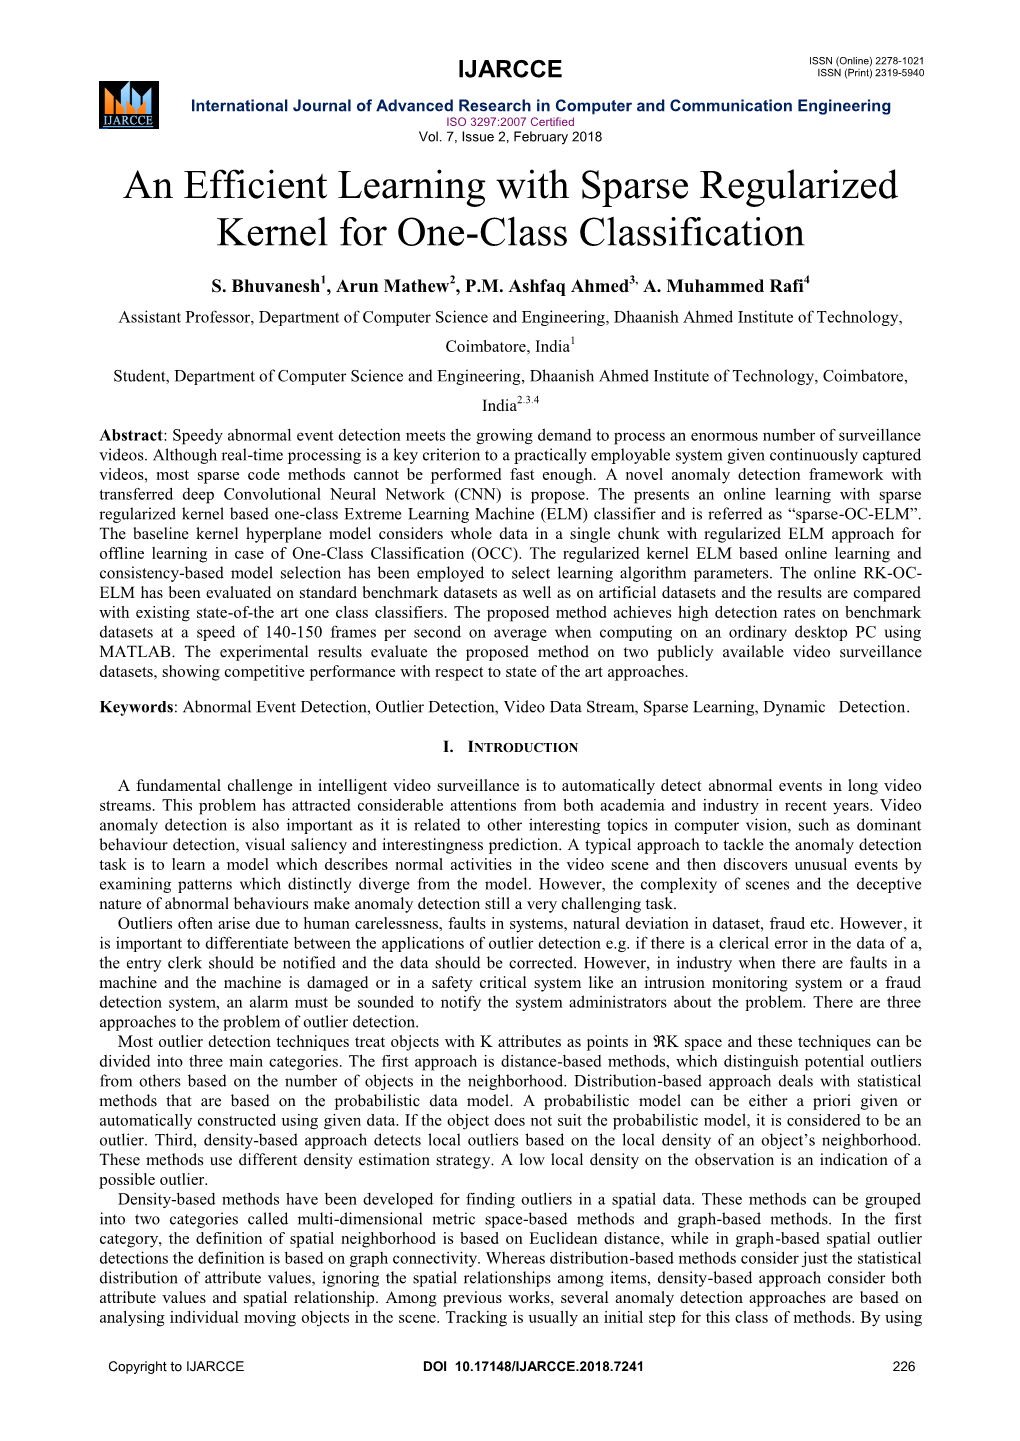 An Efficient Learning with Sparse Regularized Kernel for One-Class Classification